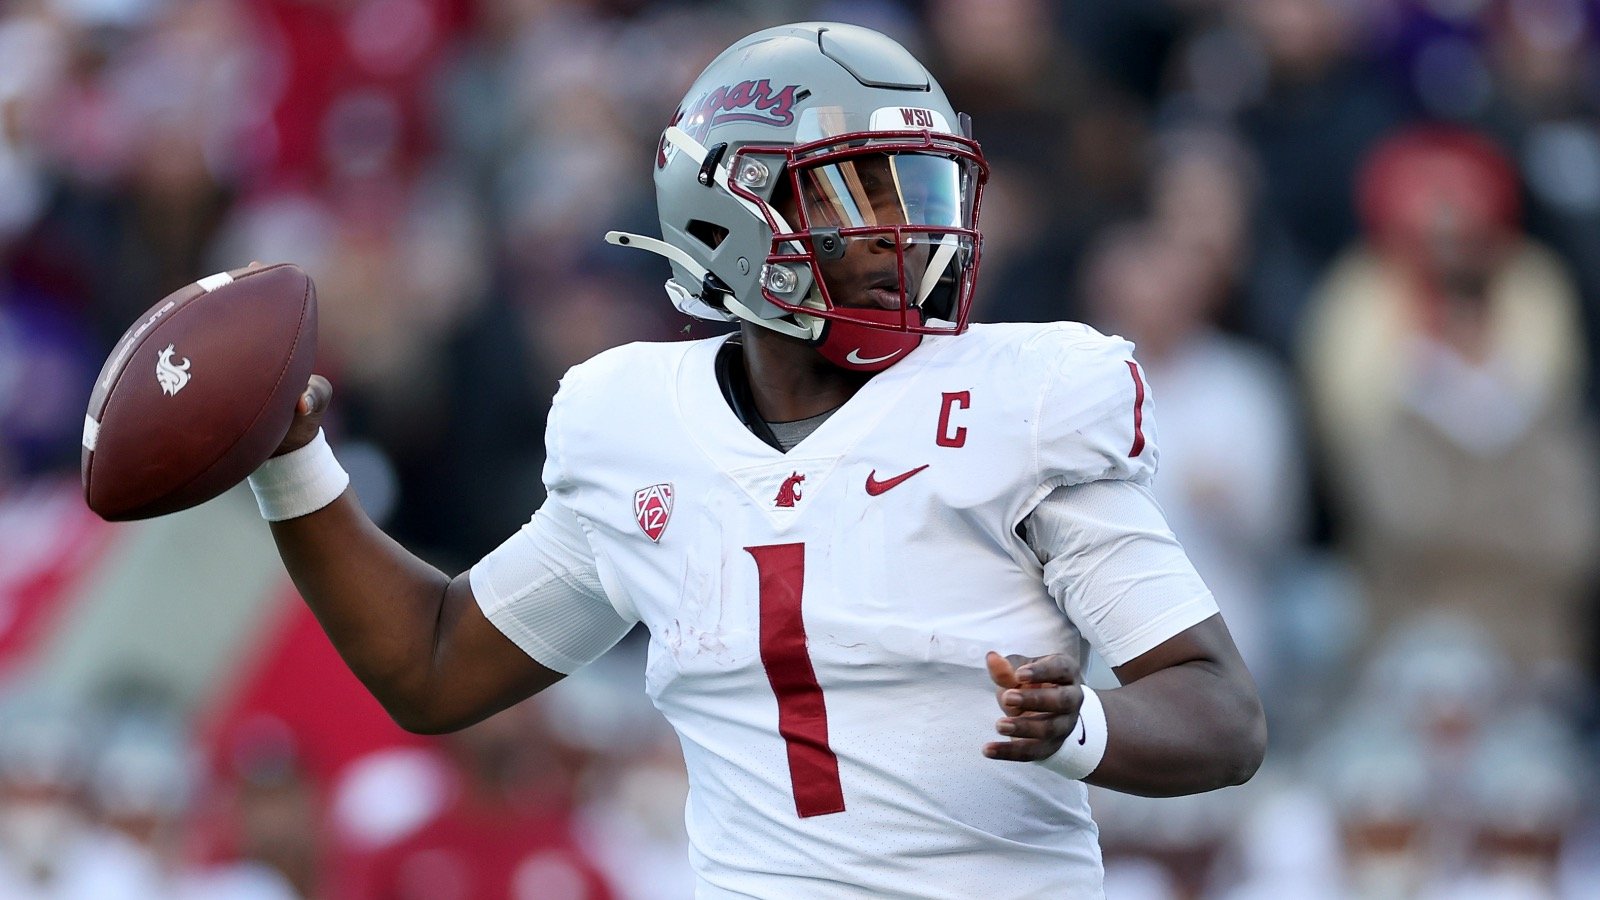 Rumors Of Wazzu QB Cam Ward Stacking Multiple $1M Offers To Transfer Could Send Shockwaves Across CFB